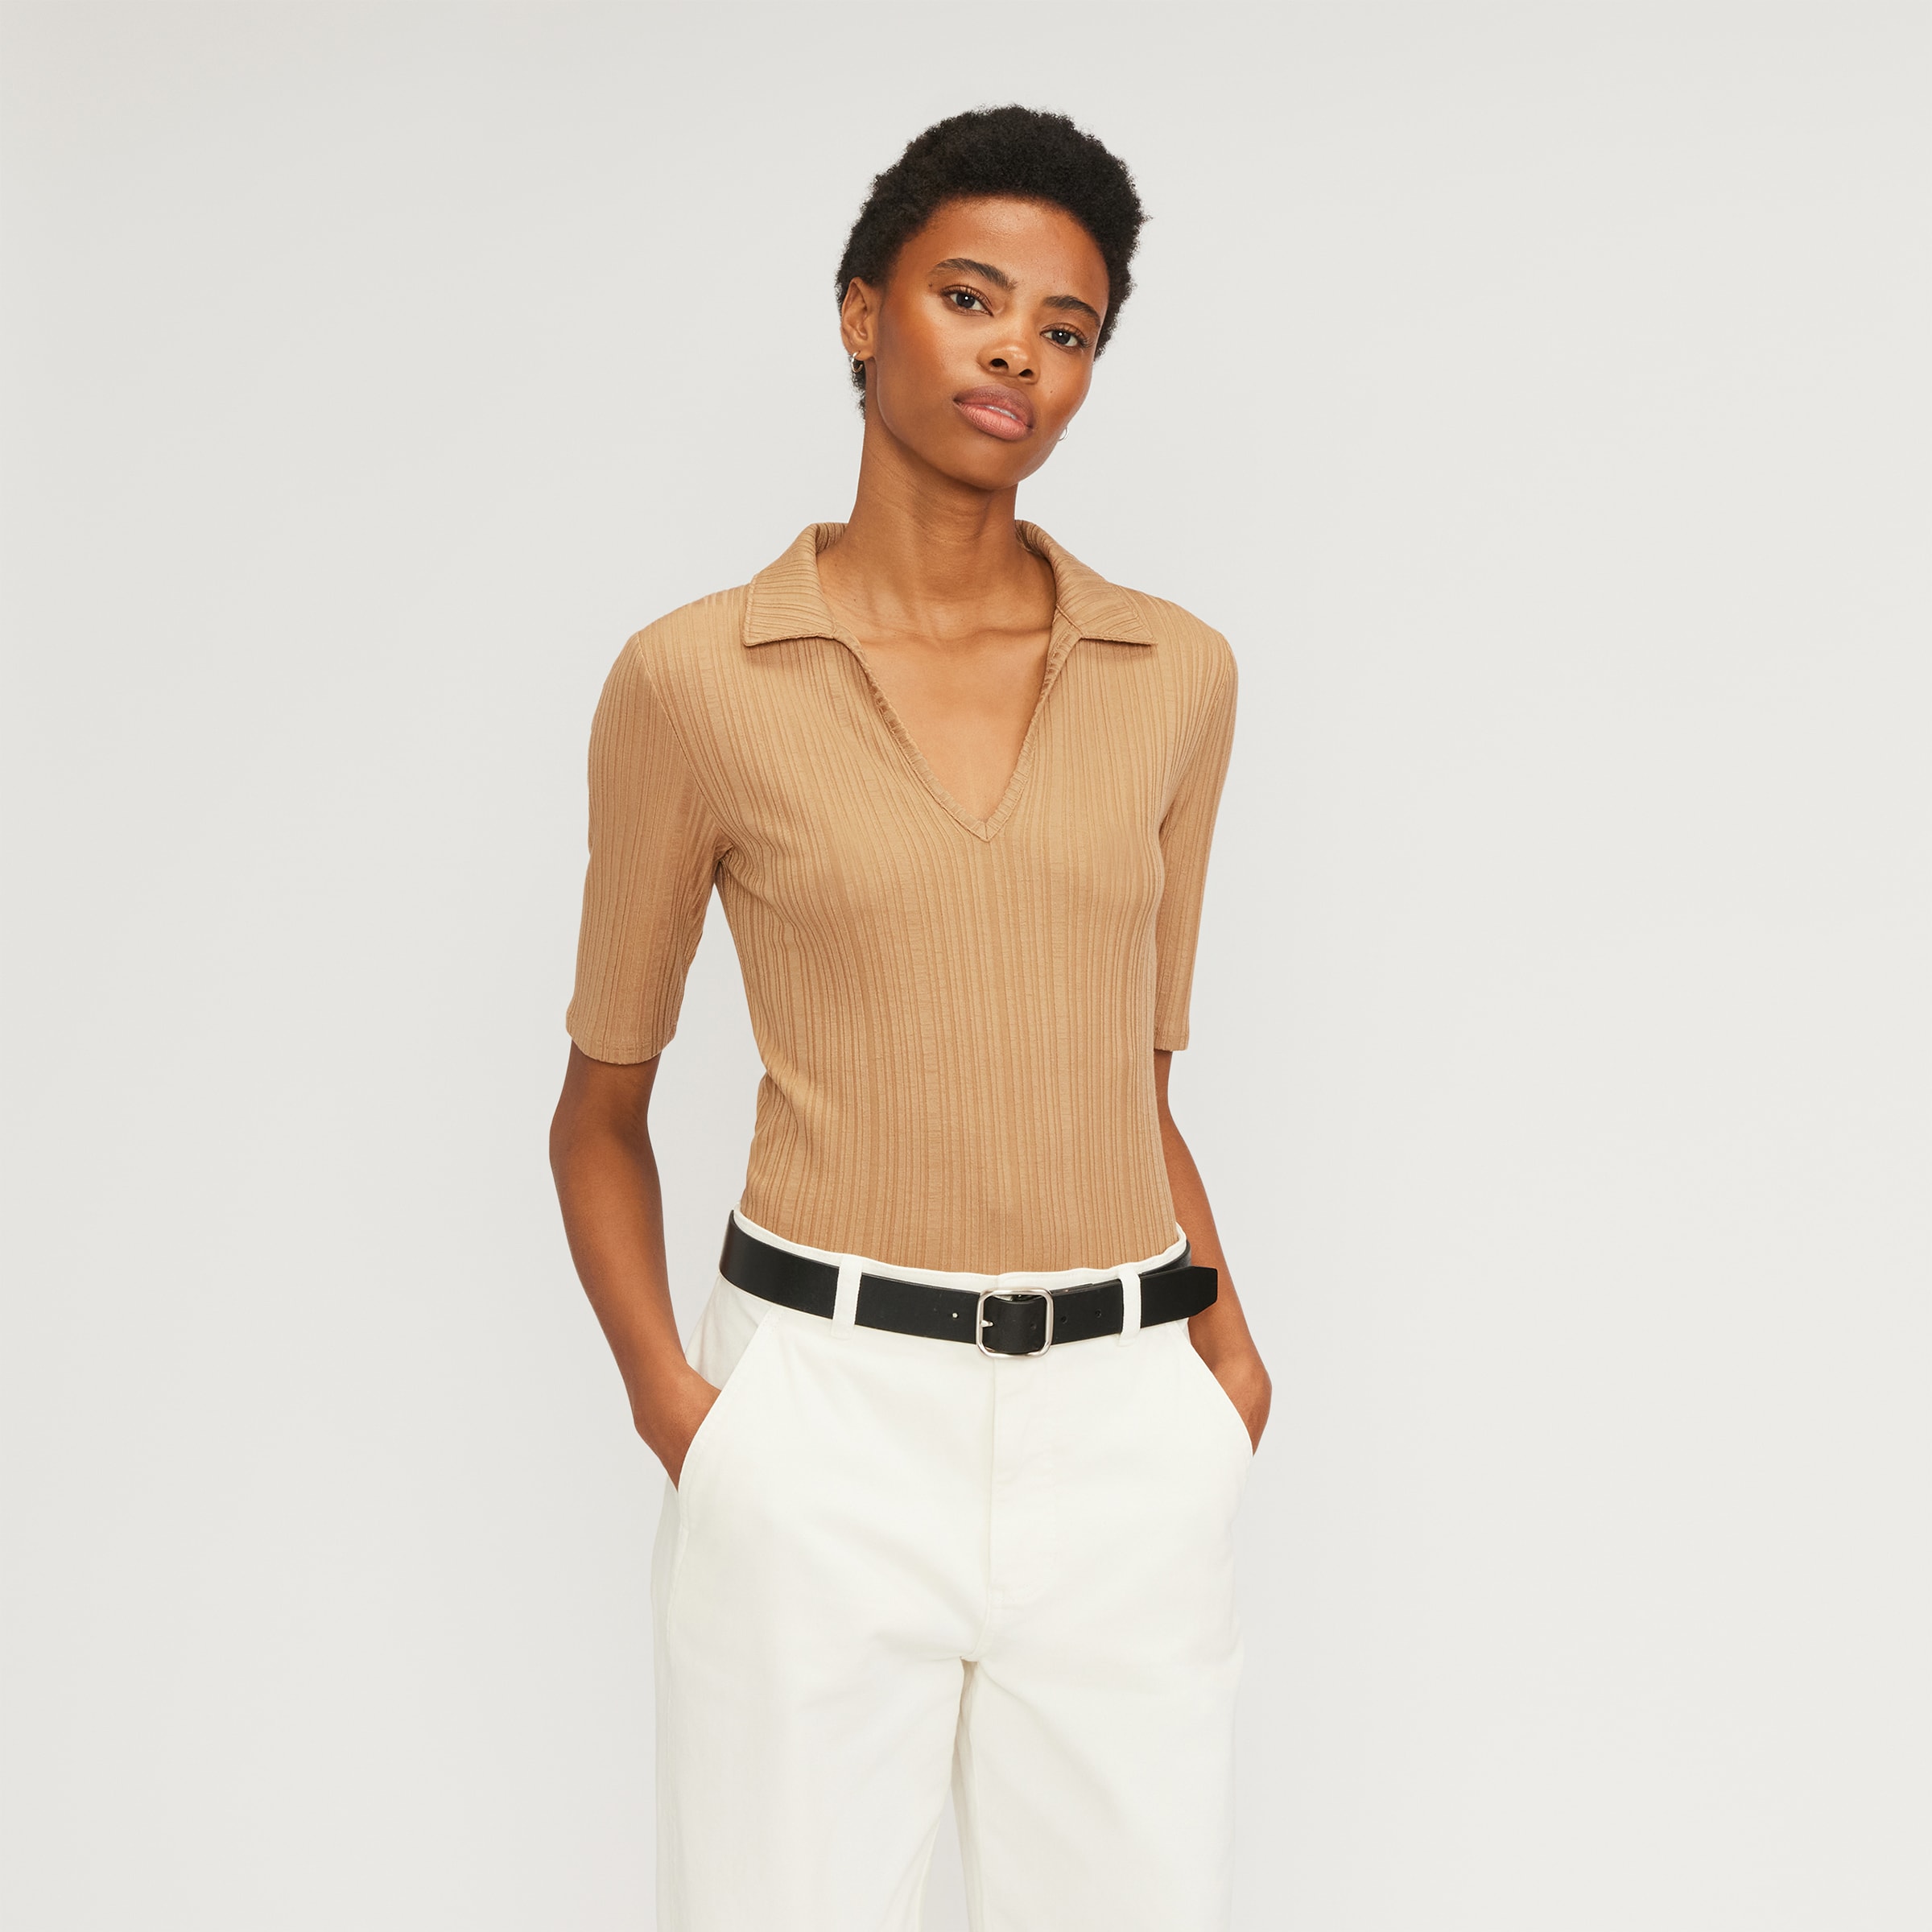 Everlane Women's Rib Soft Knit Open Collar Polo Shirt in Caramel, Size Extra Small